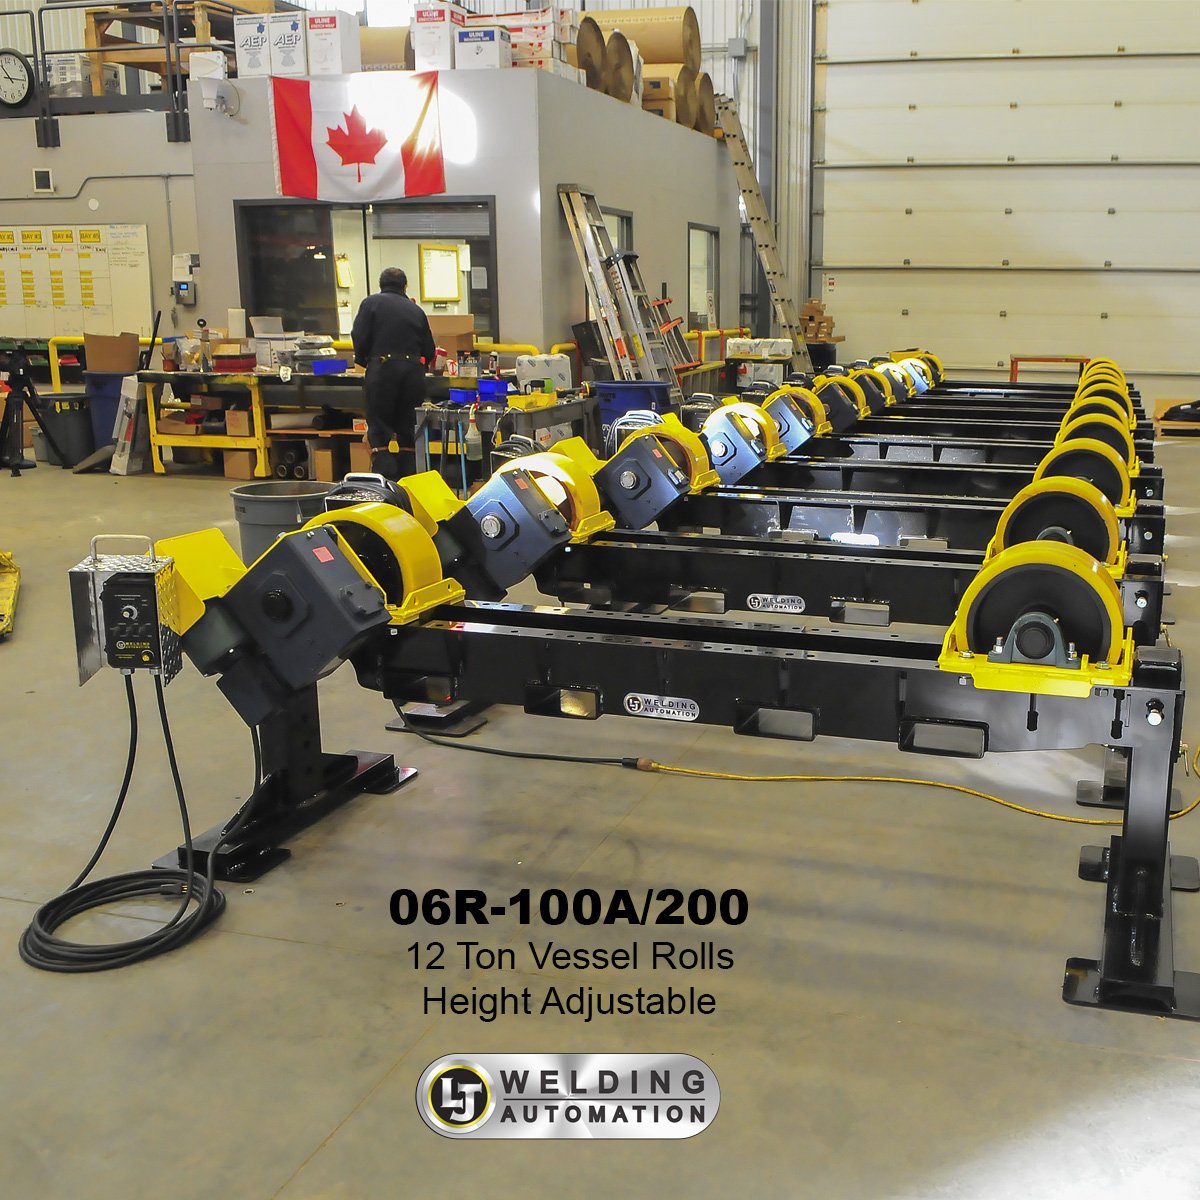 06R-100A-200 vessel rollers